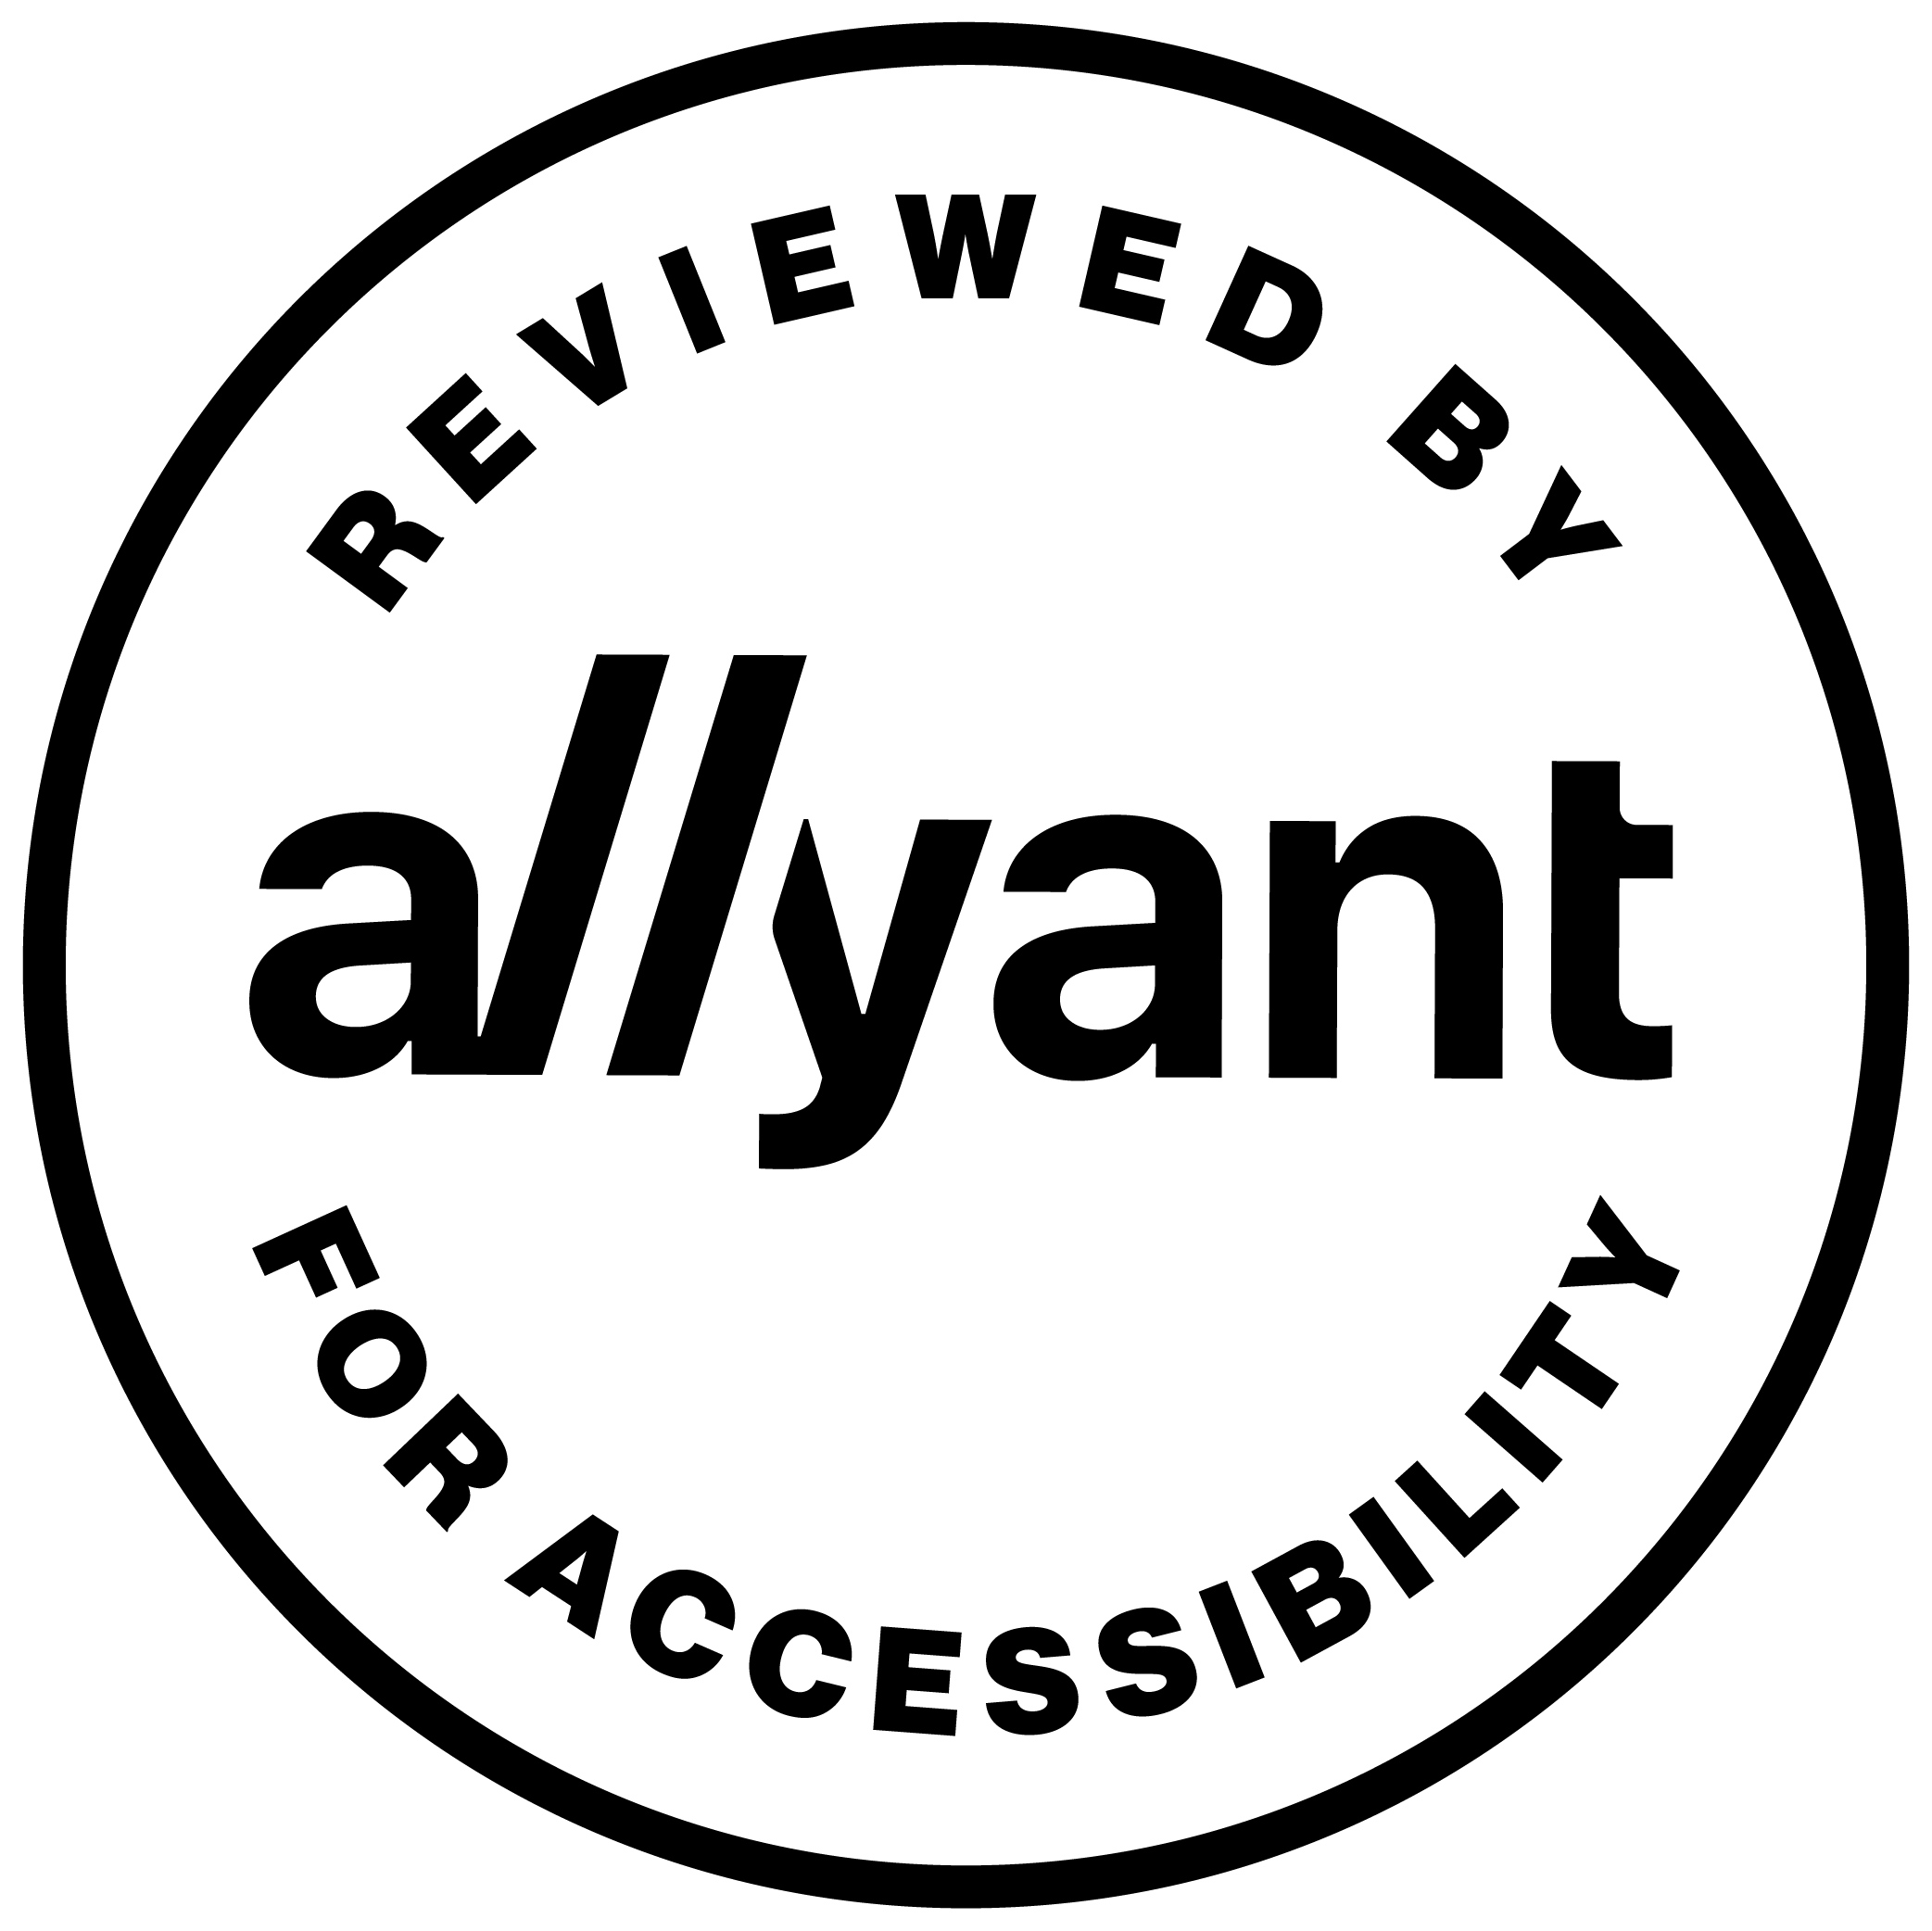 Reviewed by allyant